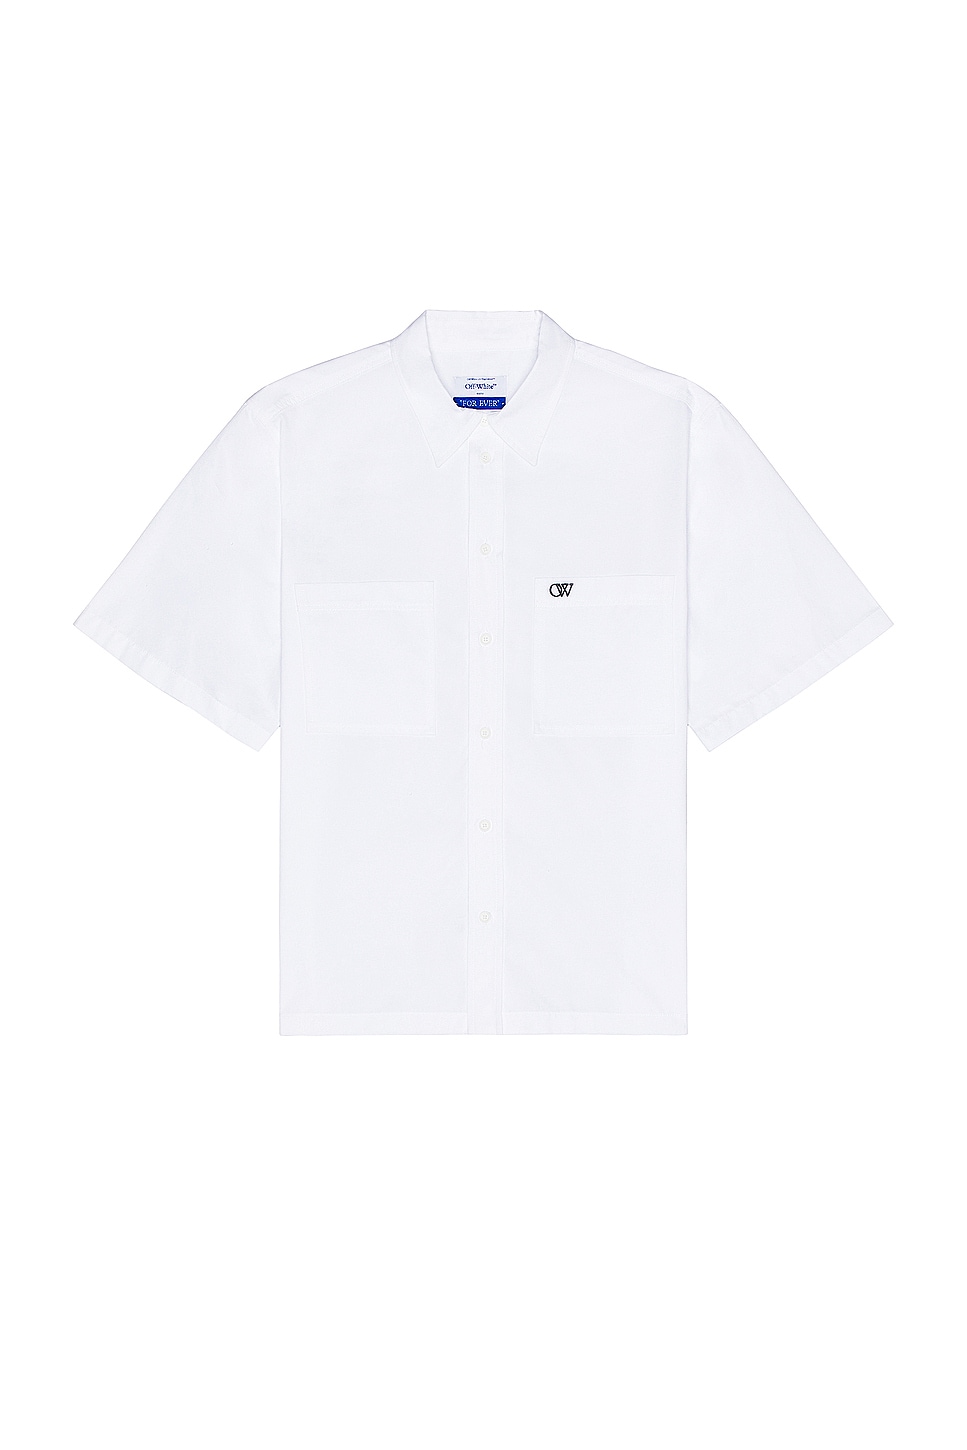 Image 1 of OFF-WHITE Emb Summer Heavycot Shirt in White & Black